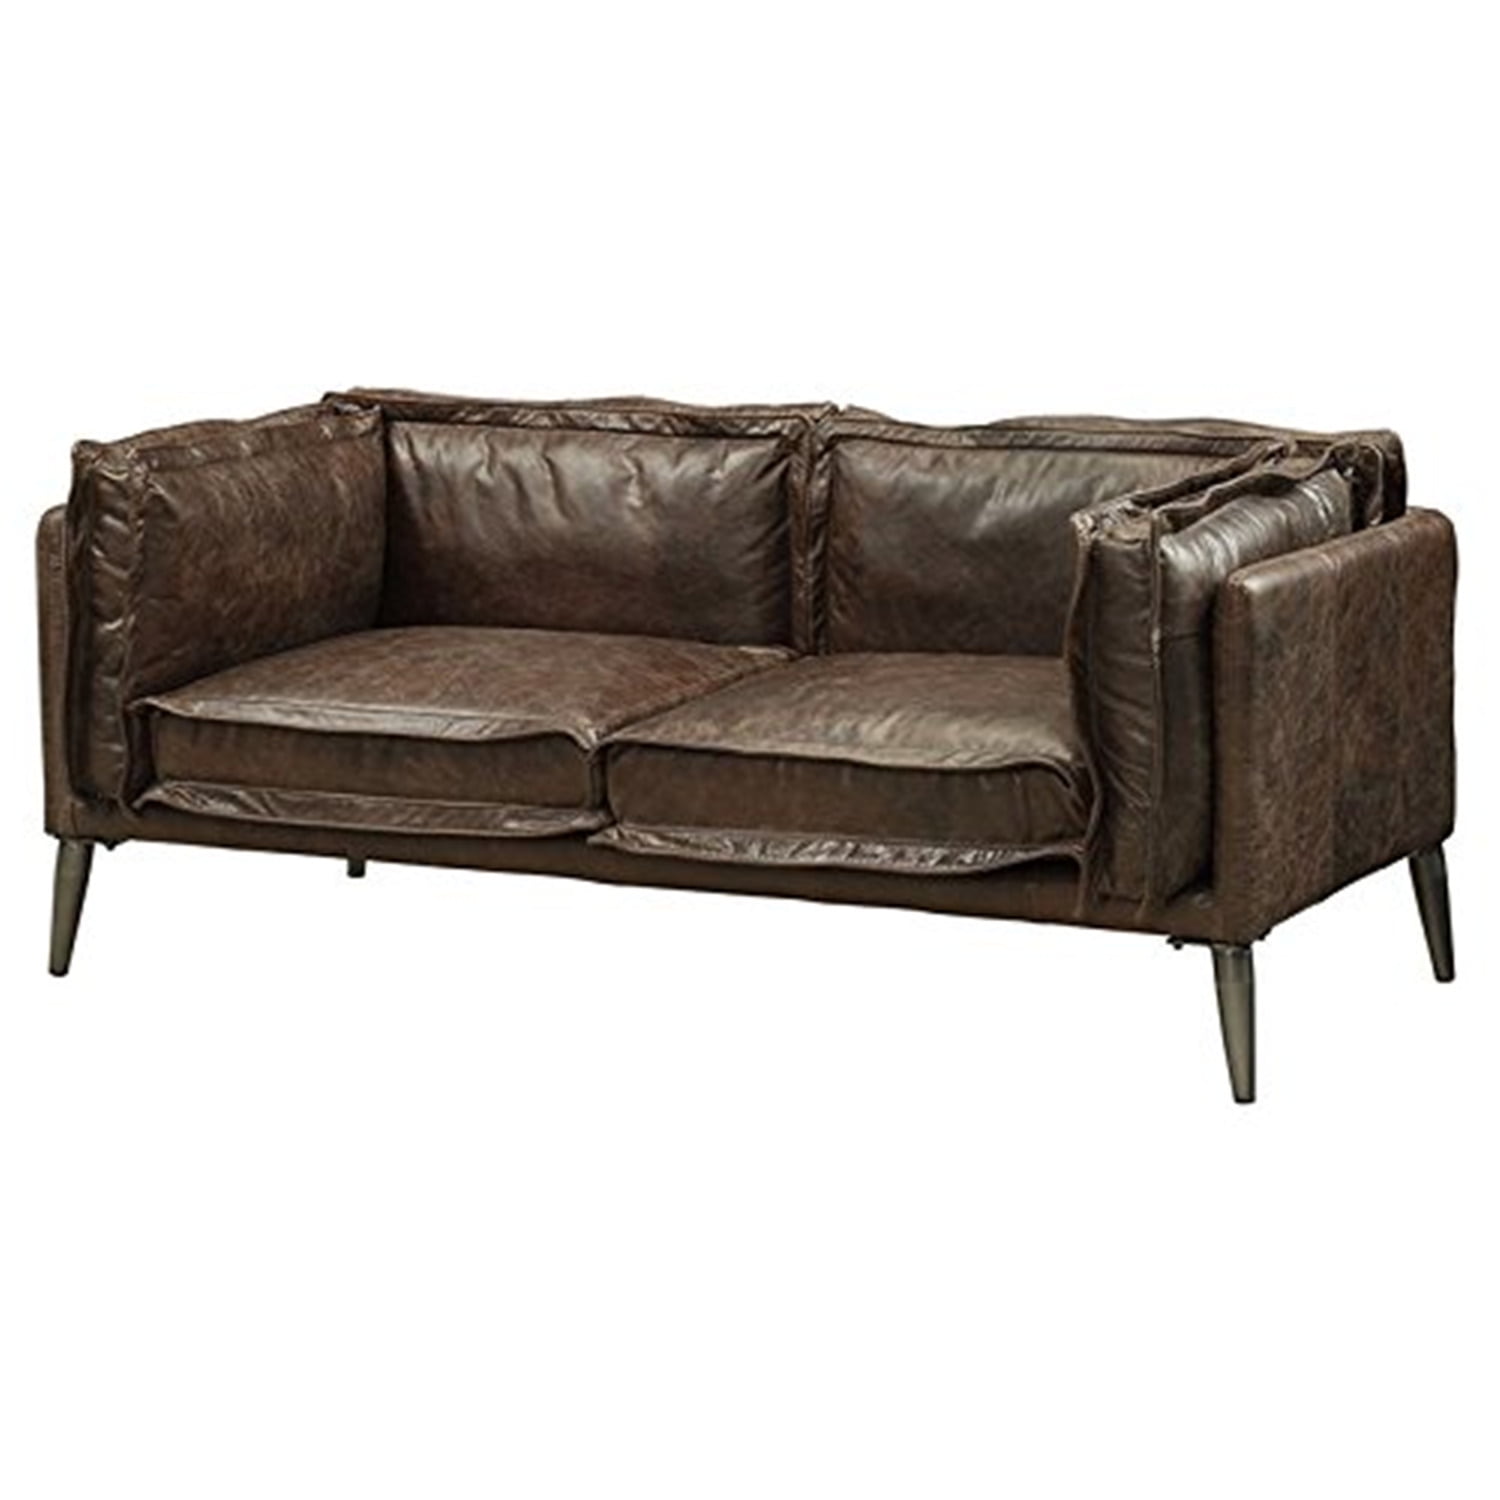 Picture of ACME 52481 Porchester Loveseat - Distress Chocolate Top Grain Leather - 30 x 71 x 34 in.